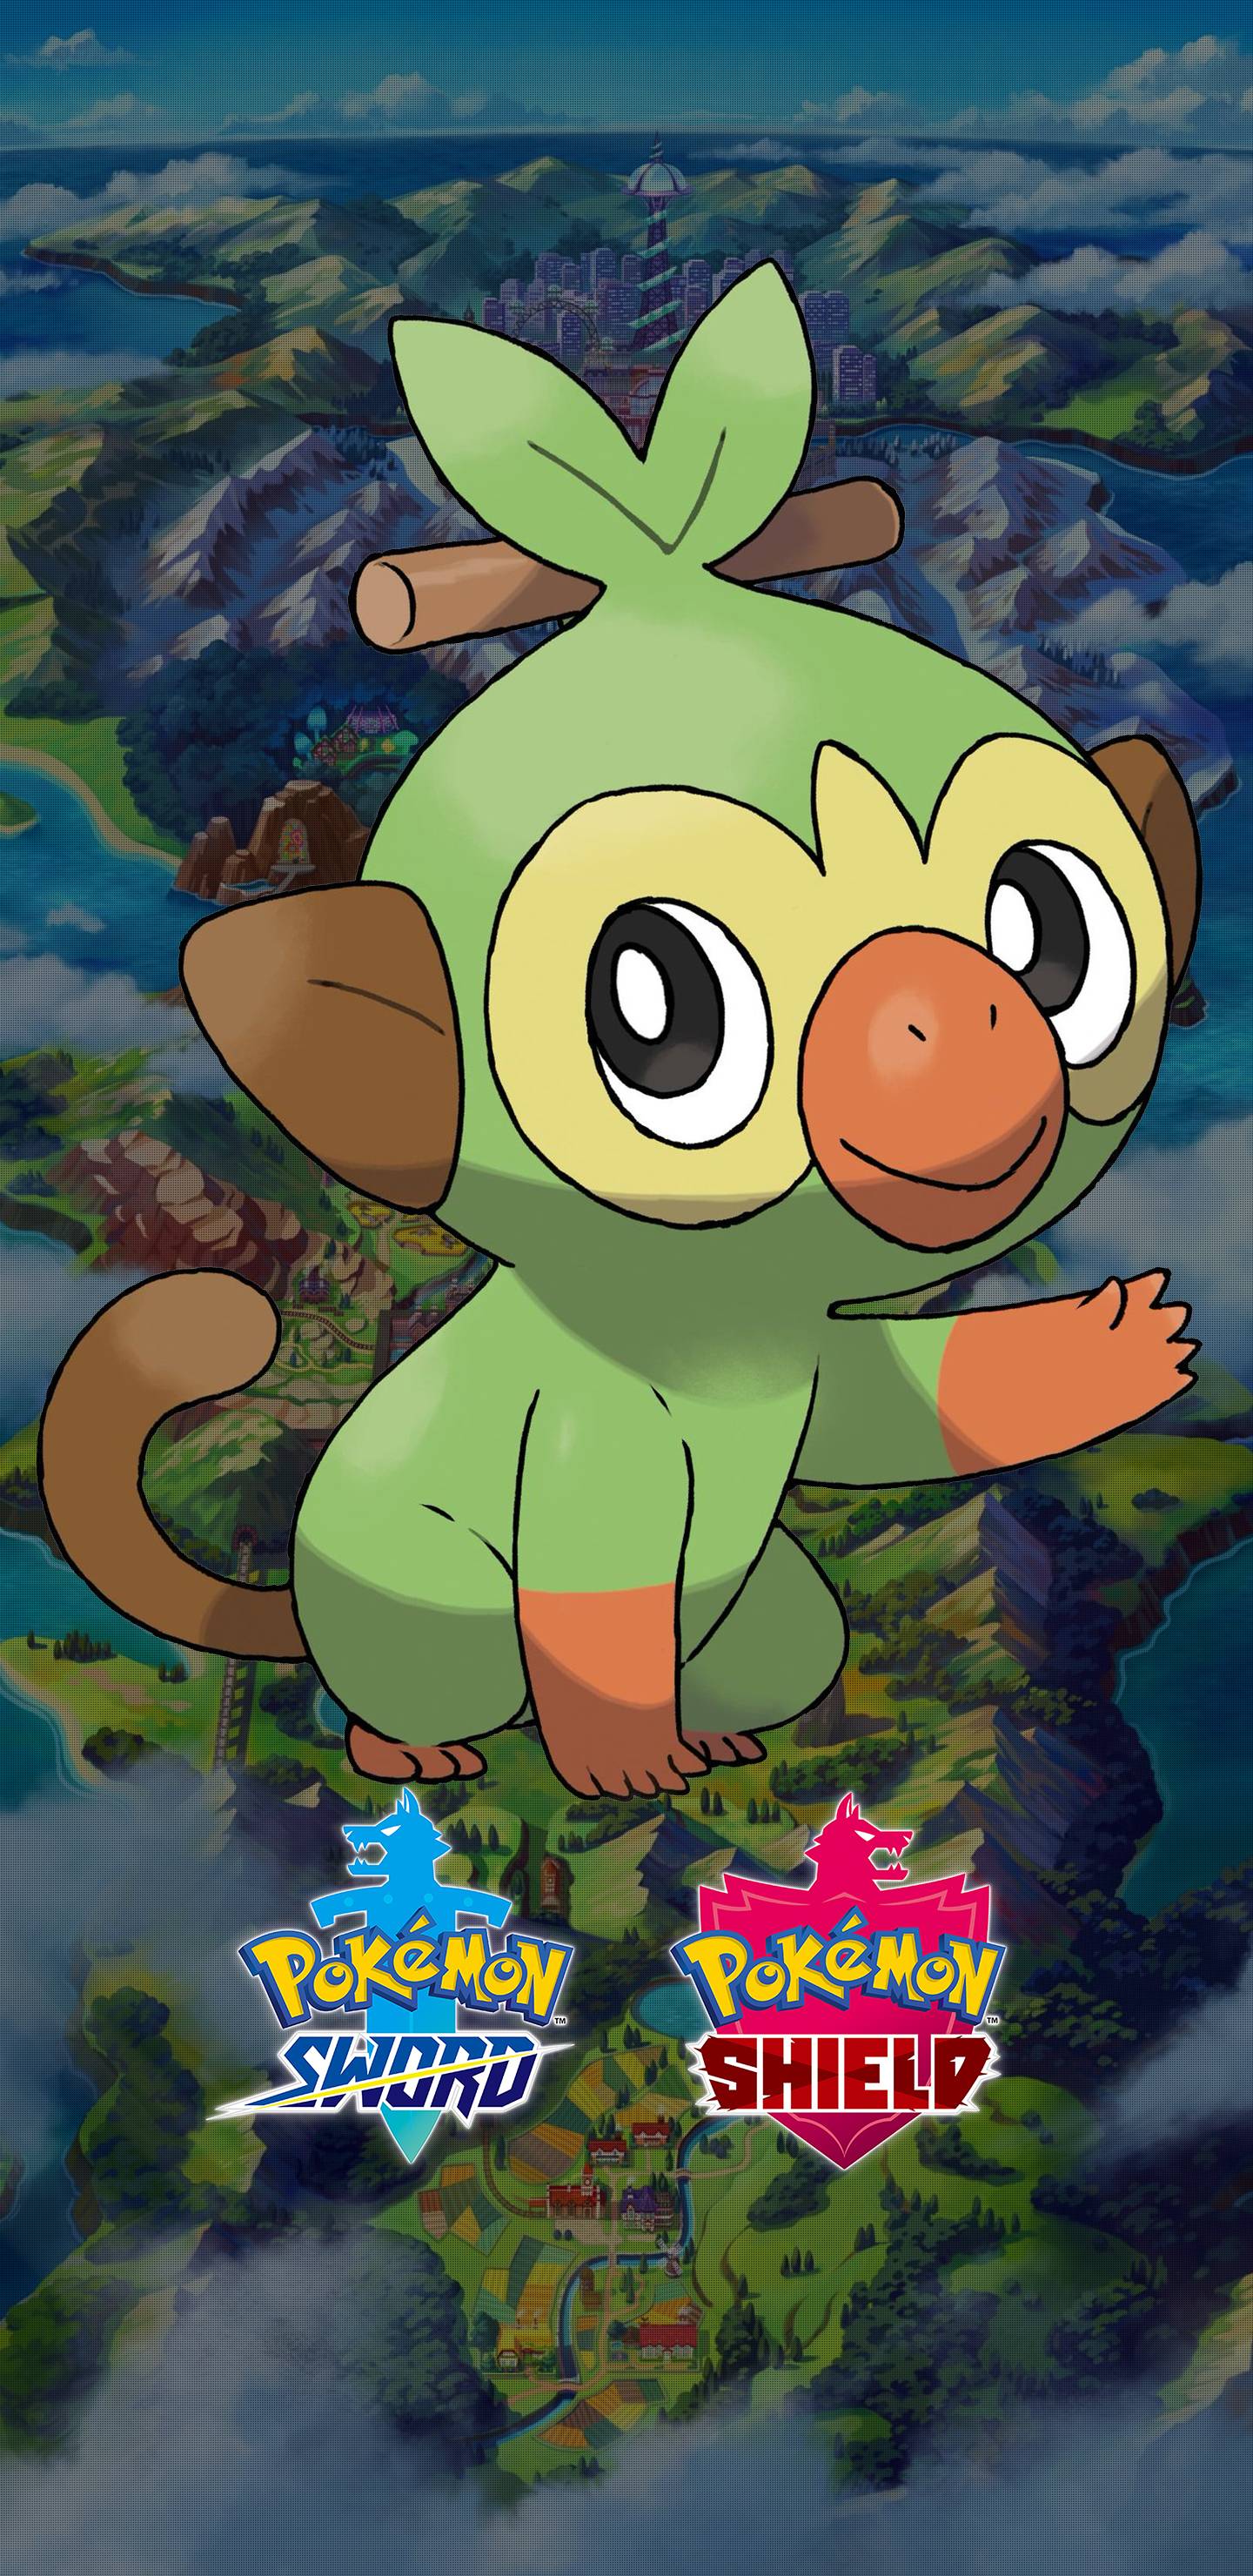 Pokemon Sword and Shield Grookey Wallpaper. Cat with Monocle